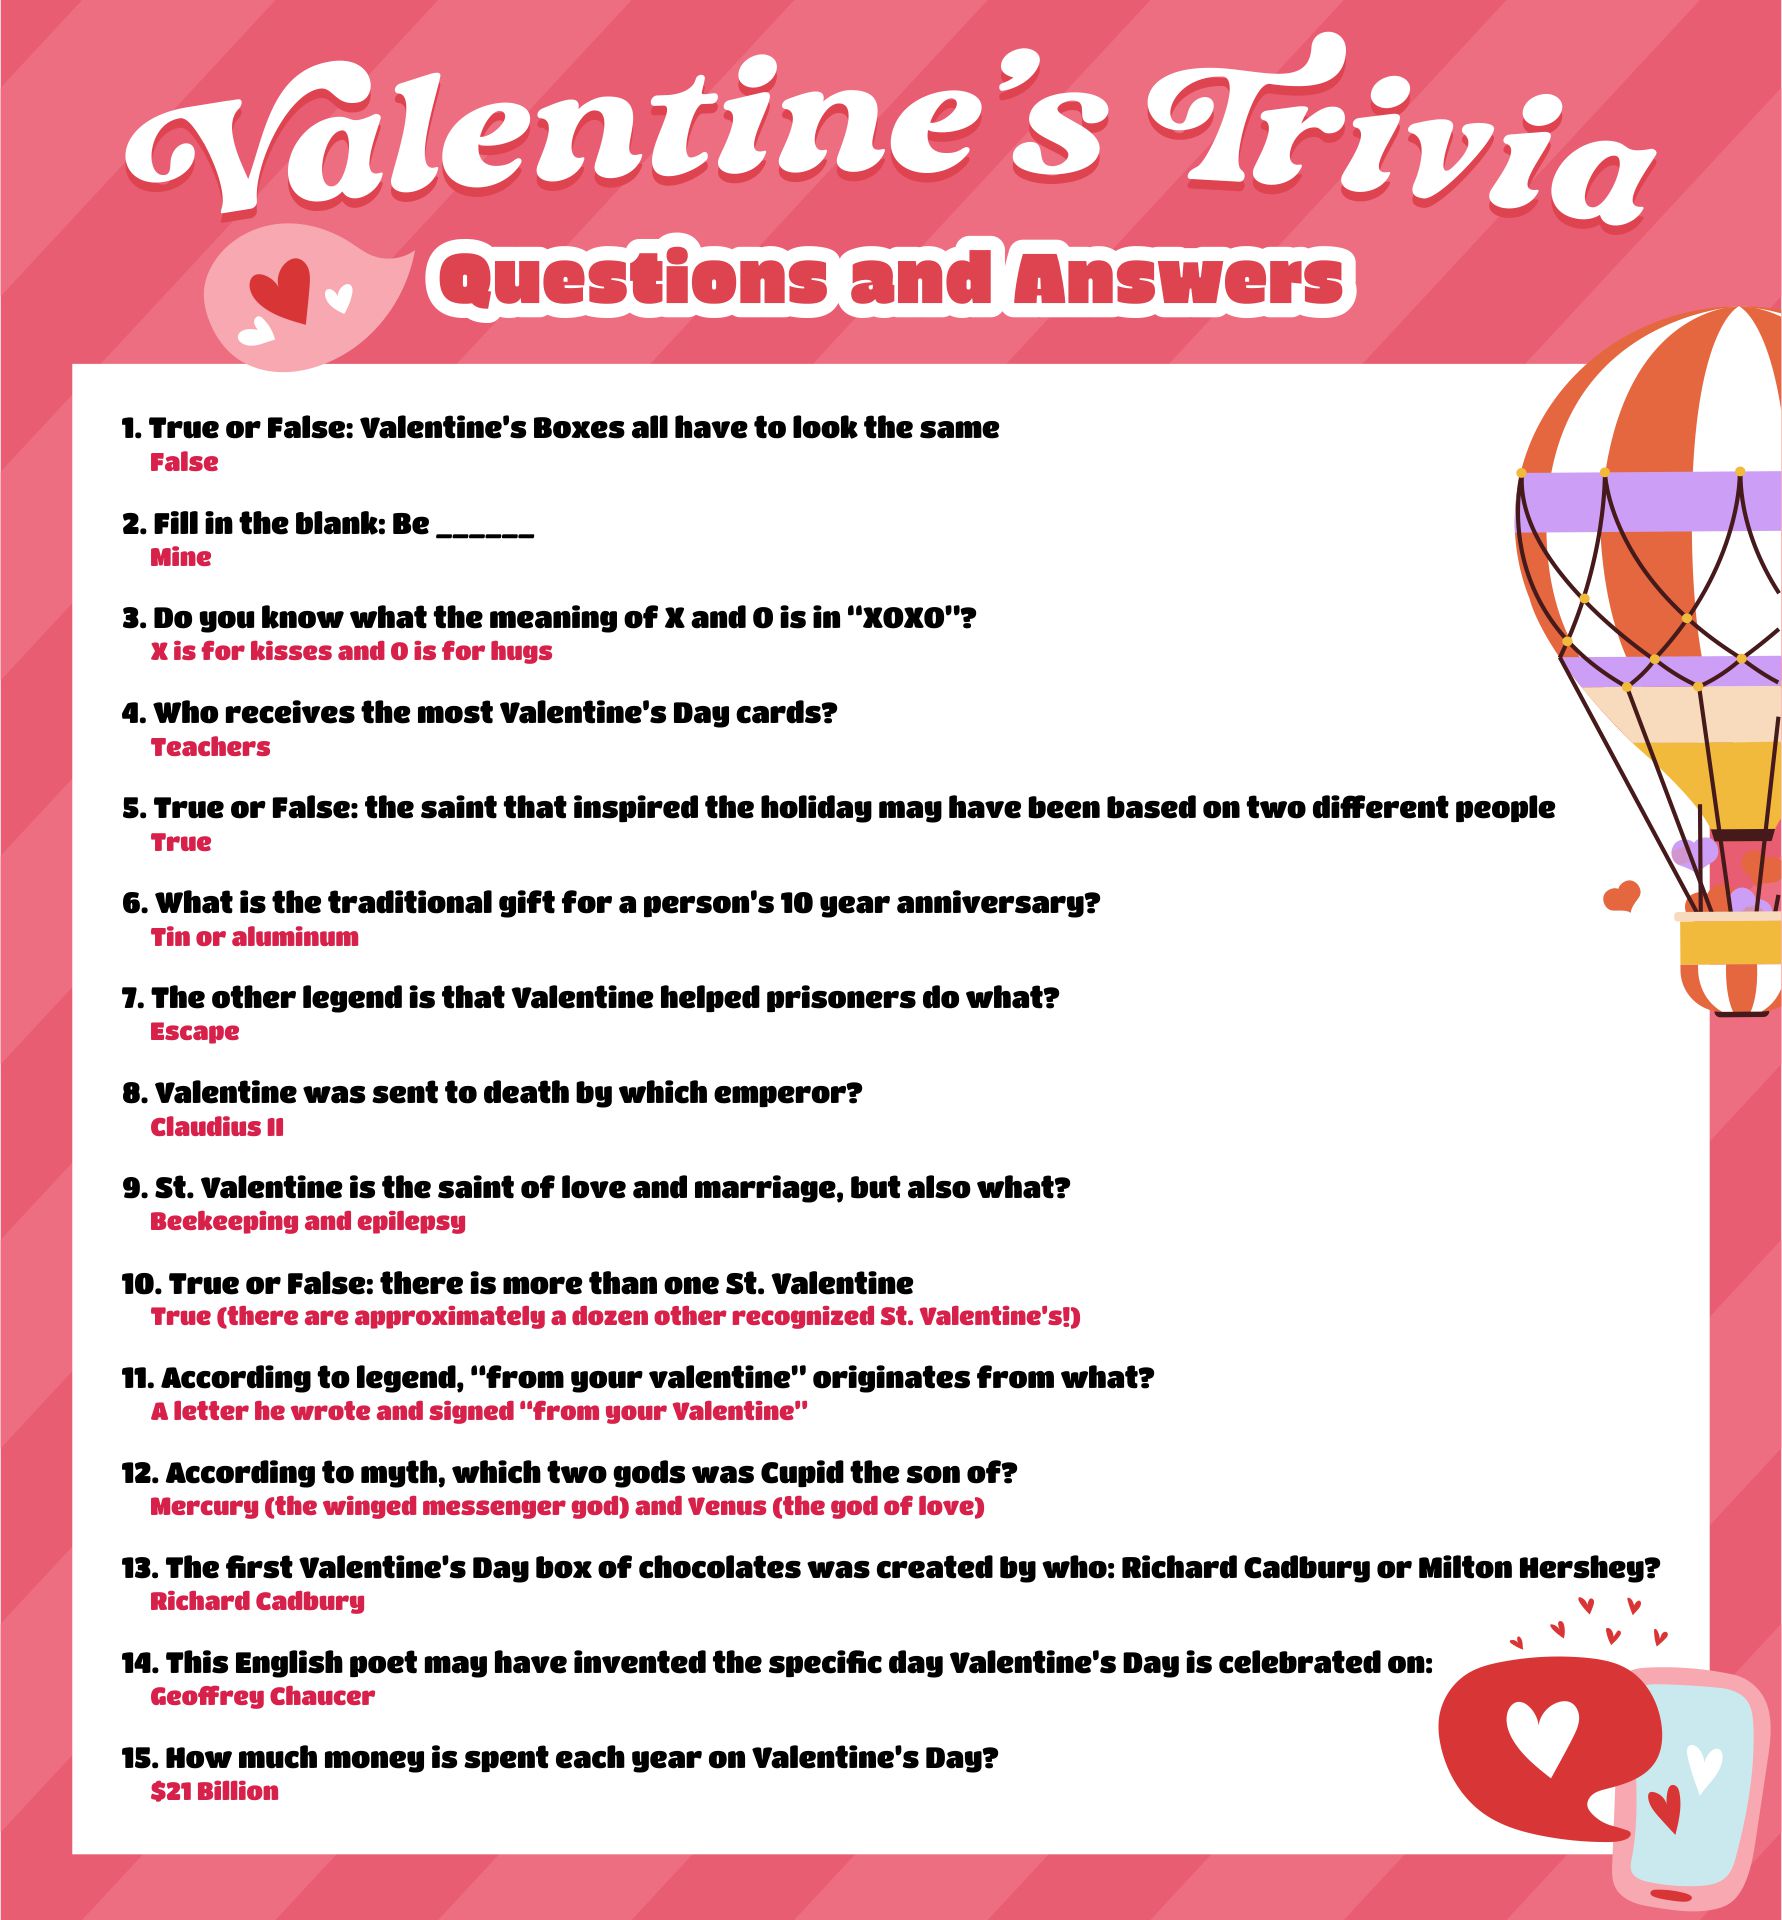 Valentines Day Trivia Questions and Answers